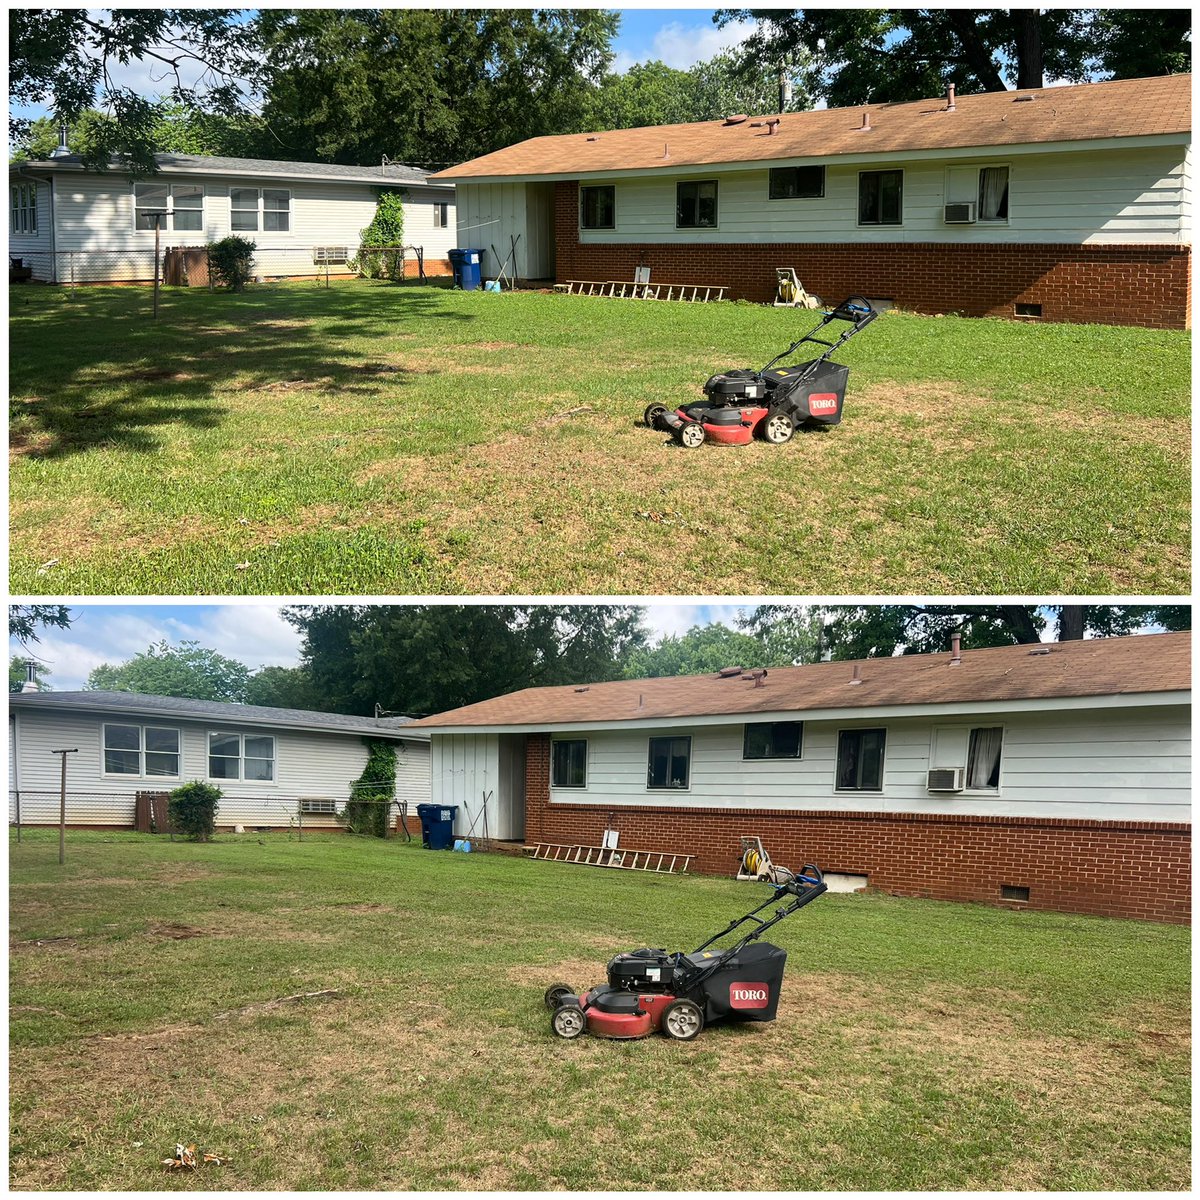 This morning I had the pleasure of mowing Ms. Johnson’s lawn . It’s always great seeing her. She’s doing well . Making a difference one lawn at a time .